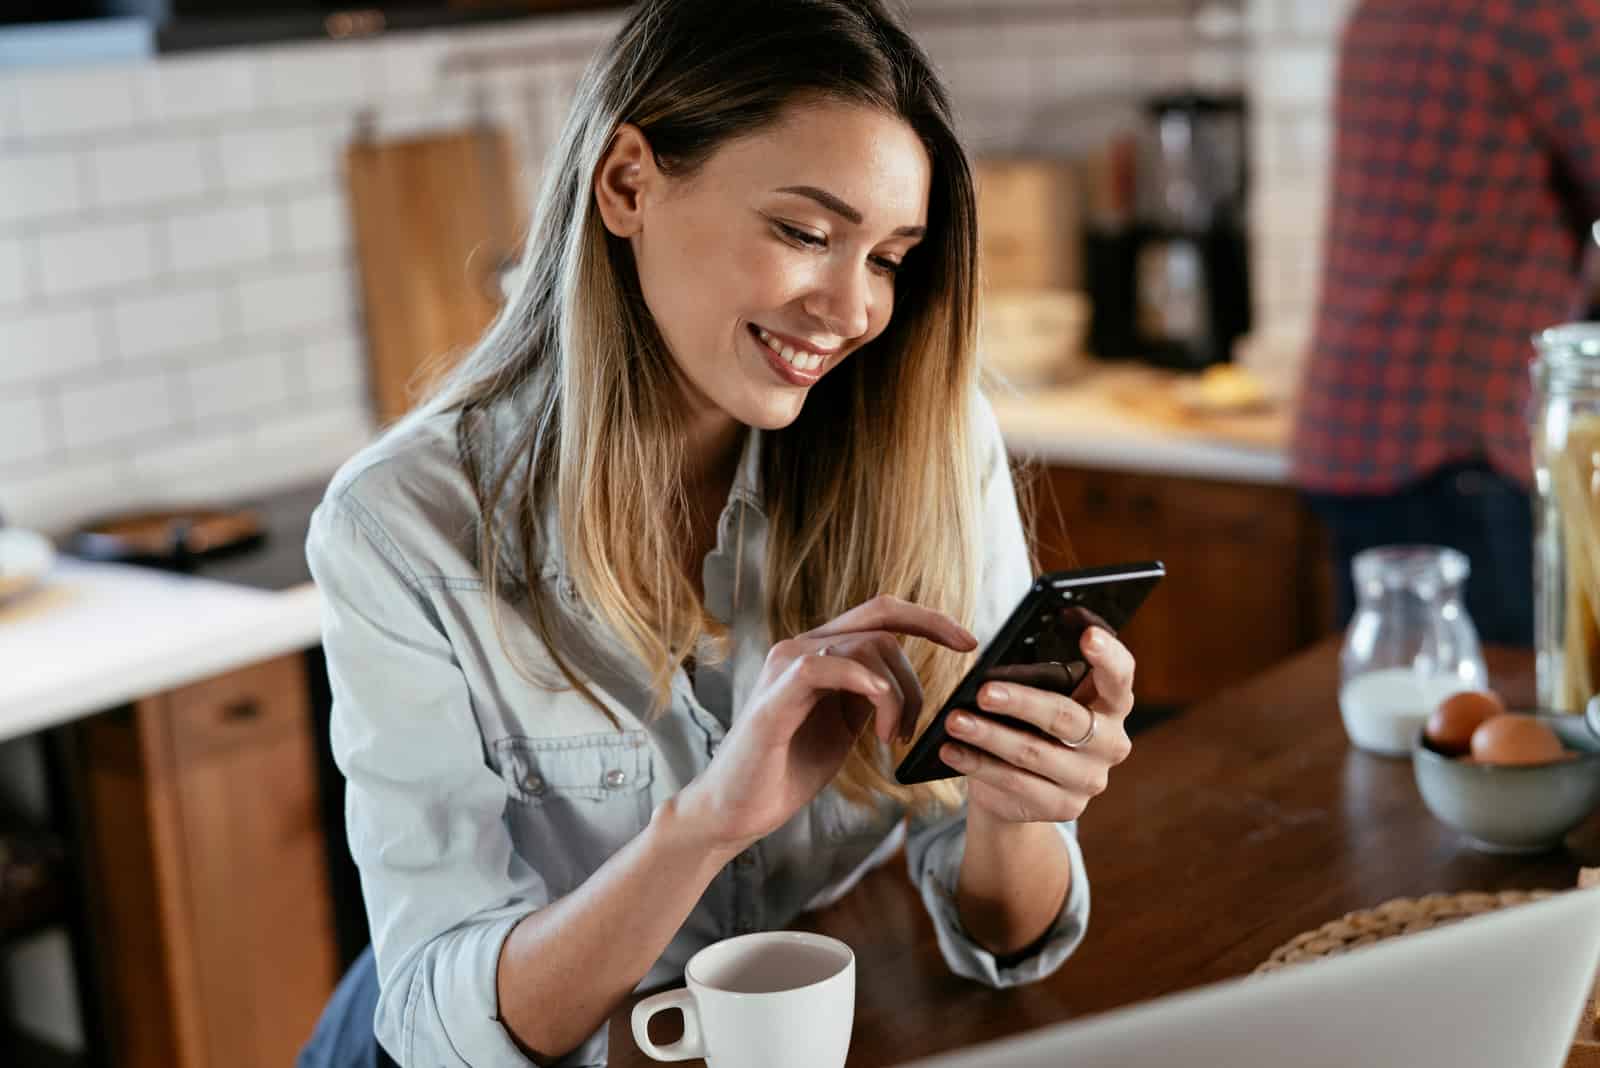 a smiling woman sitting at a table and pressing a phone